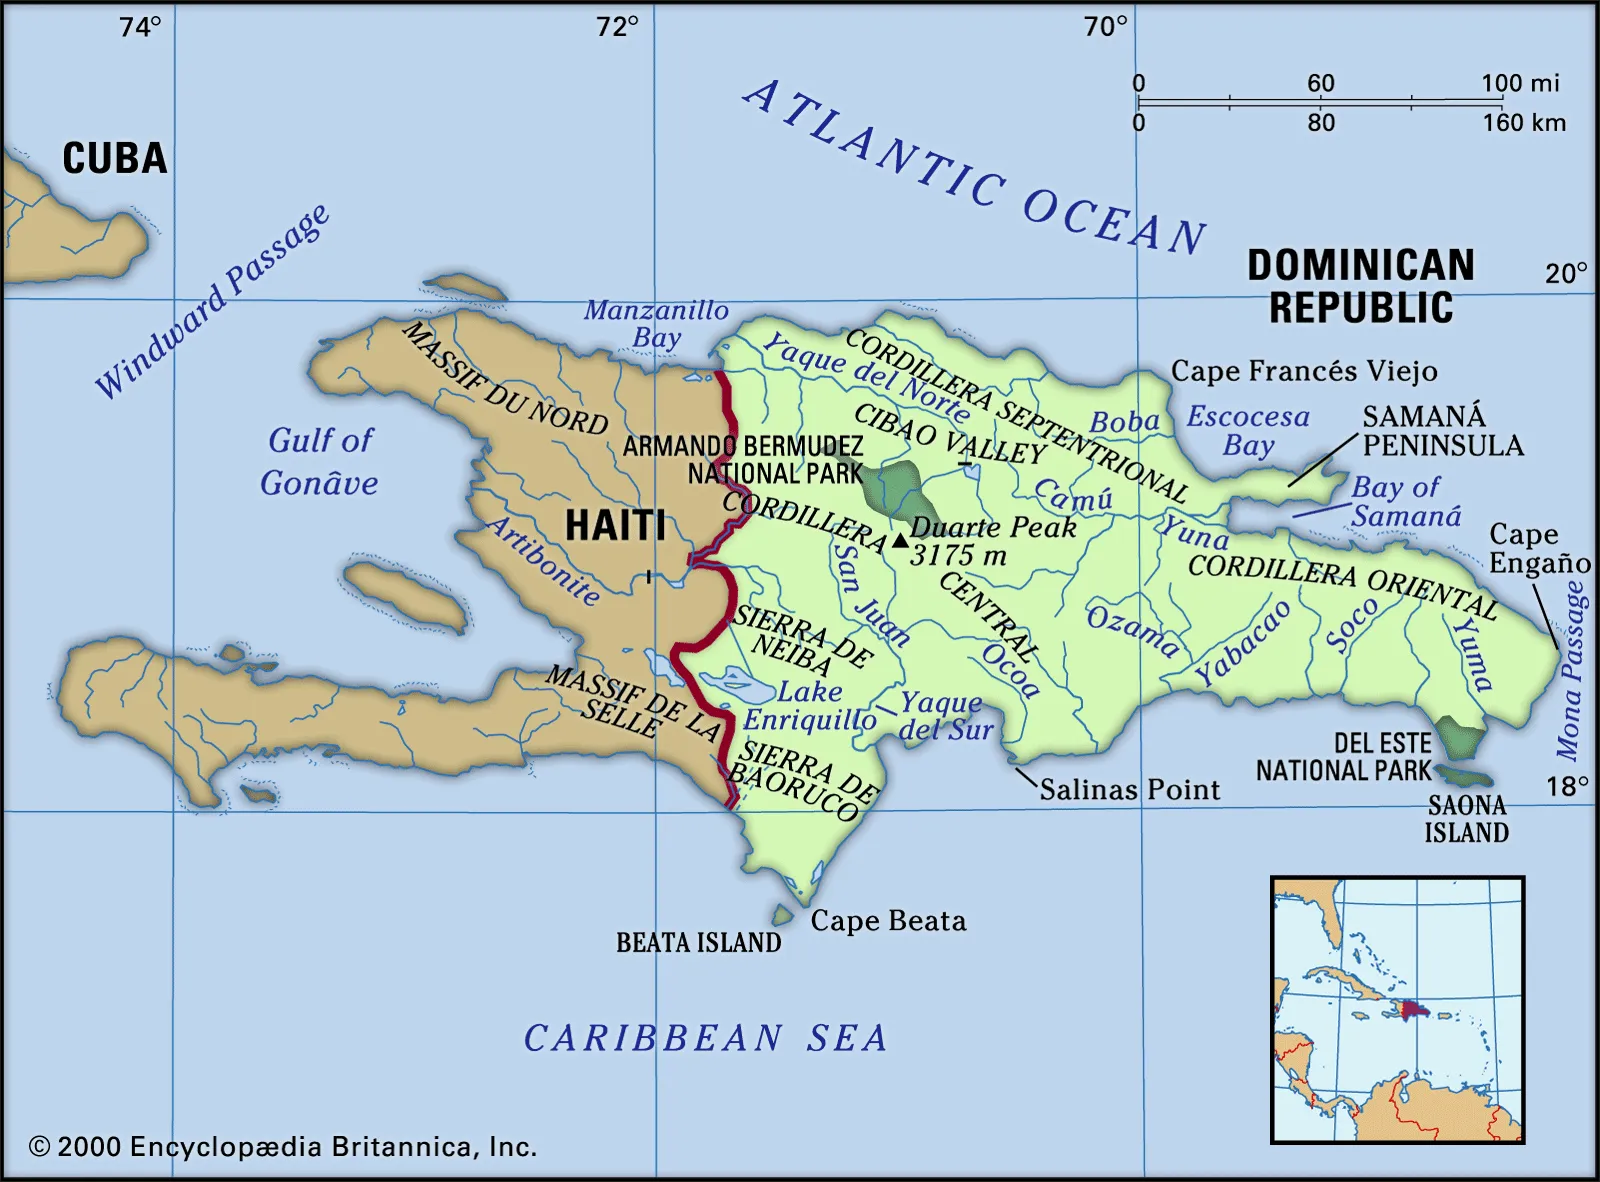 Map of Hispaniola, with Haiti on the left and Domincian Republic on the right side of the island.